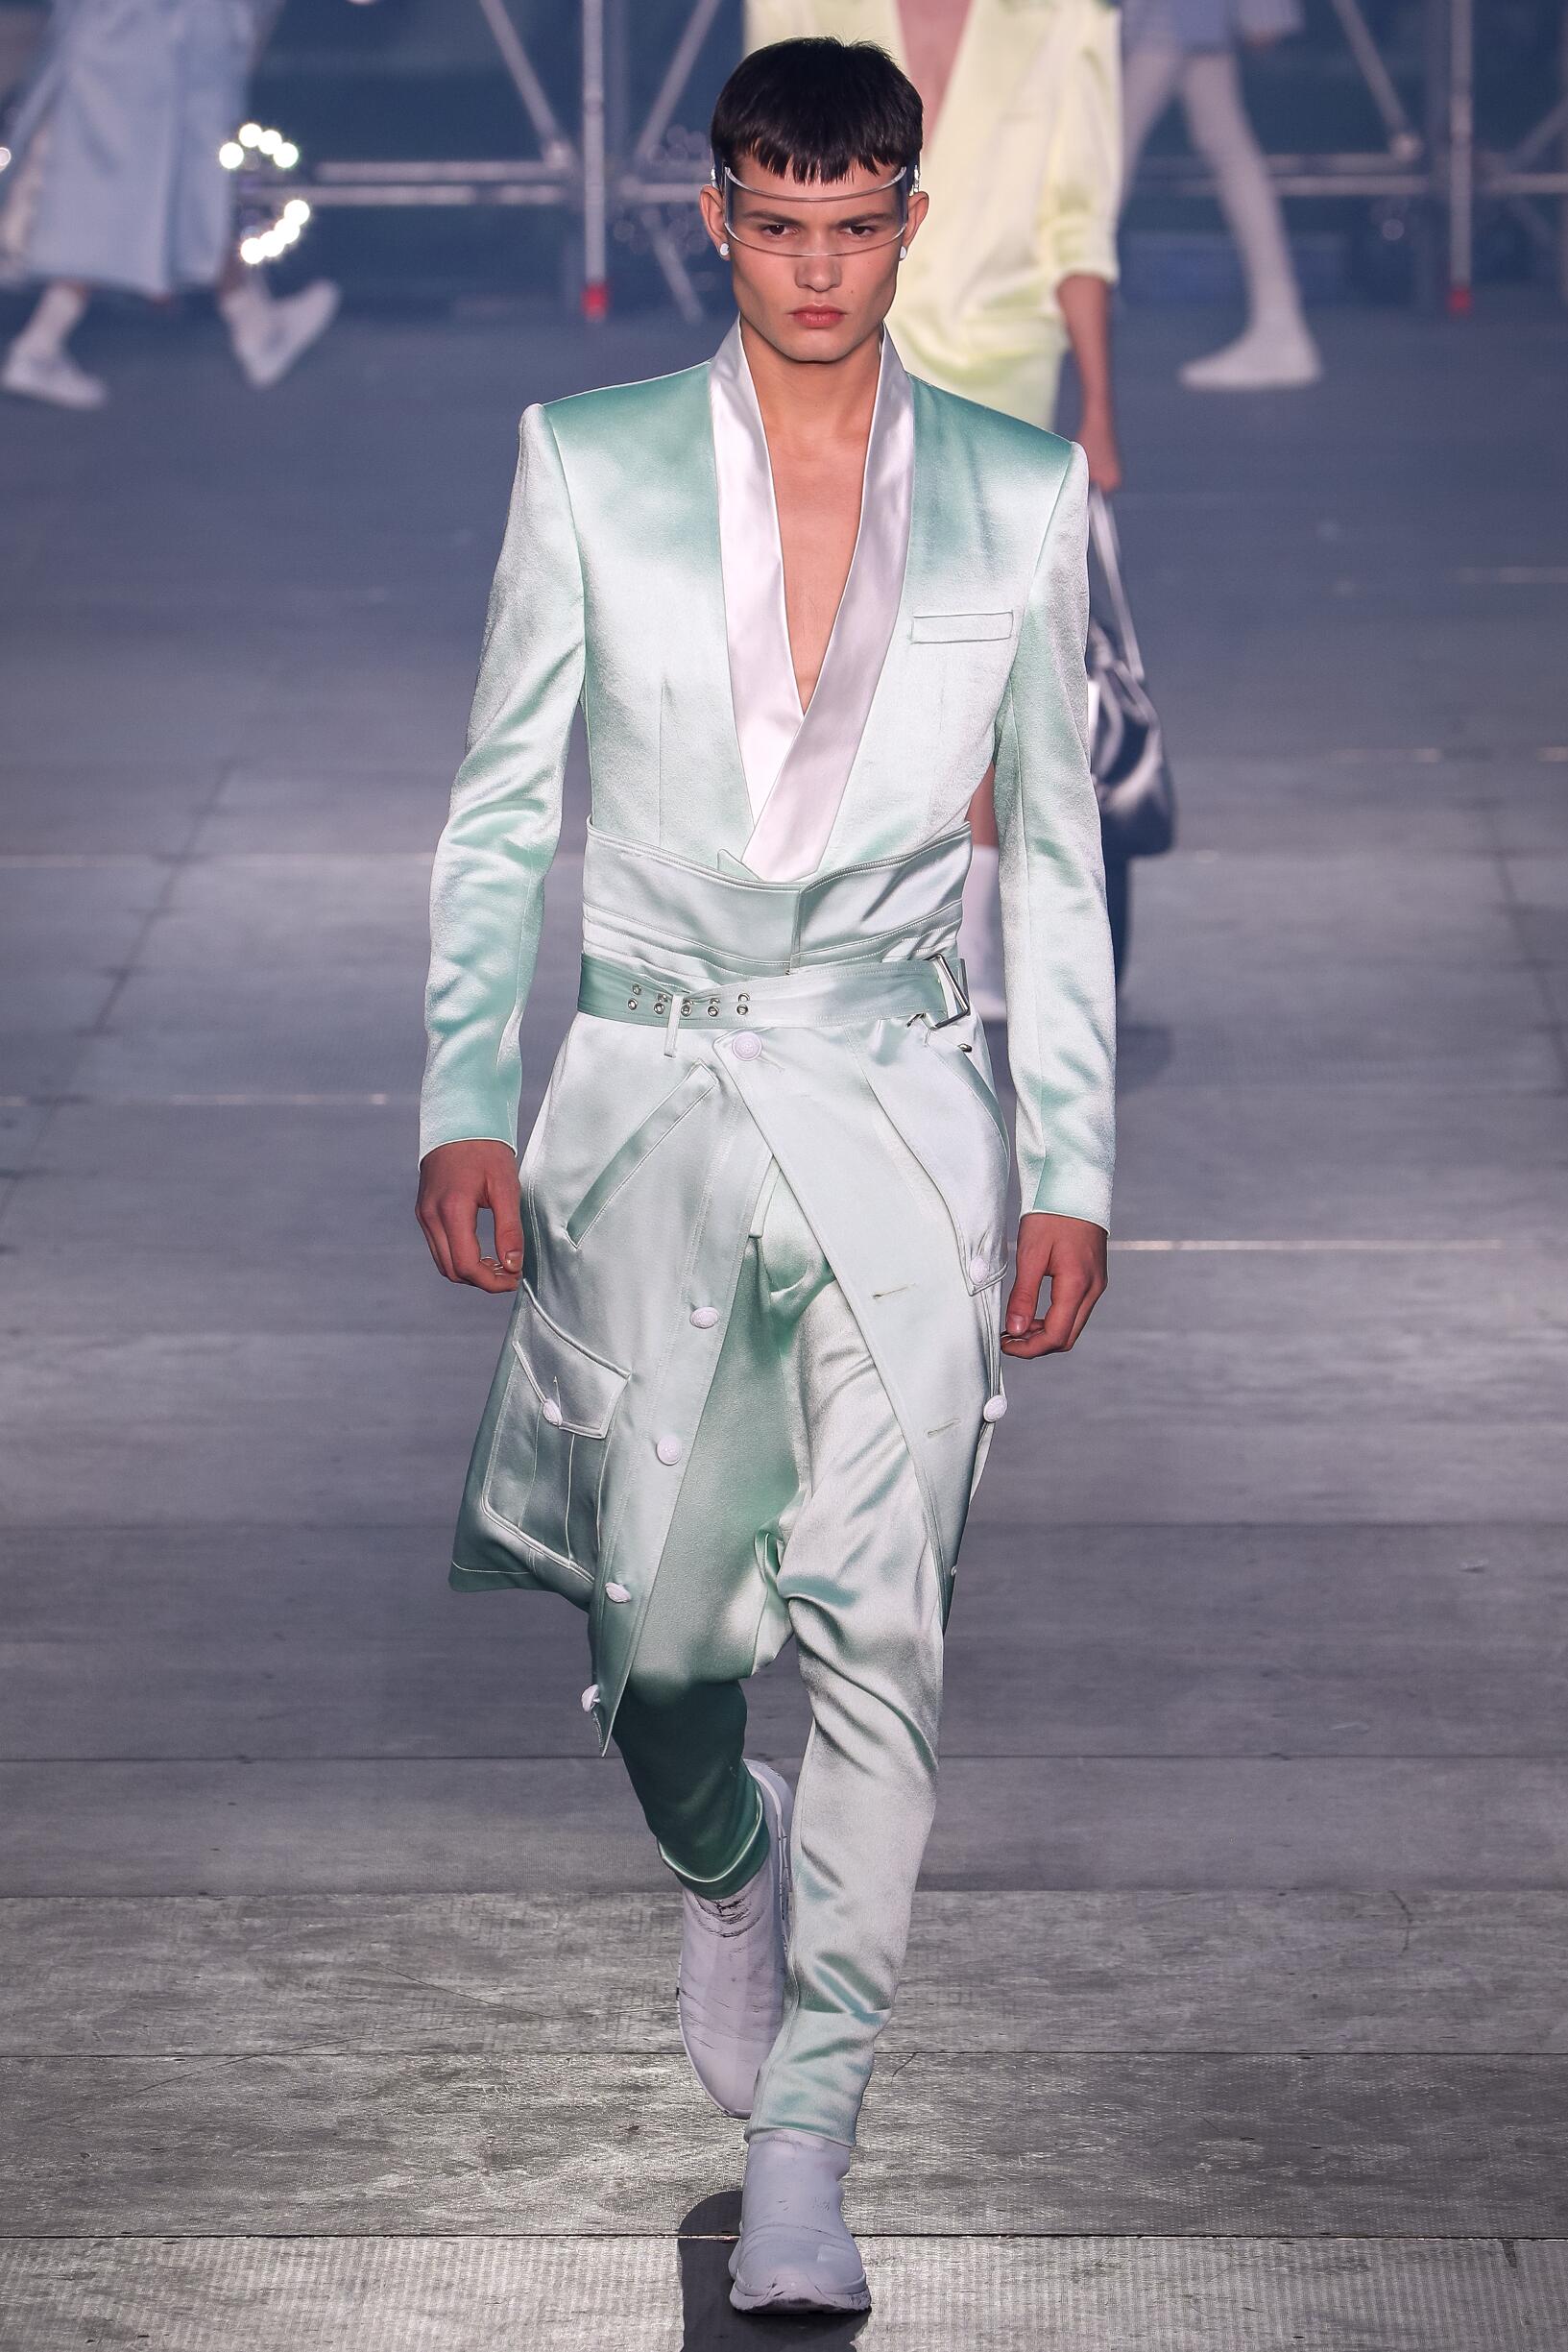 BALMAIN HOMME SPRING SUMMER 2020 COLLECTION | The Skinny Beep